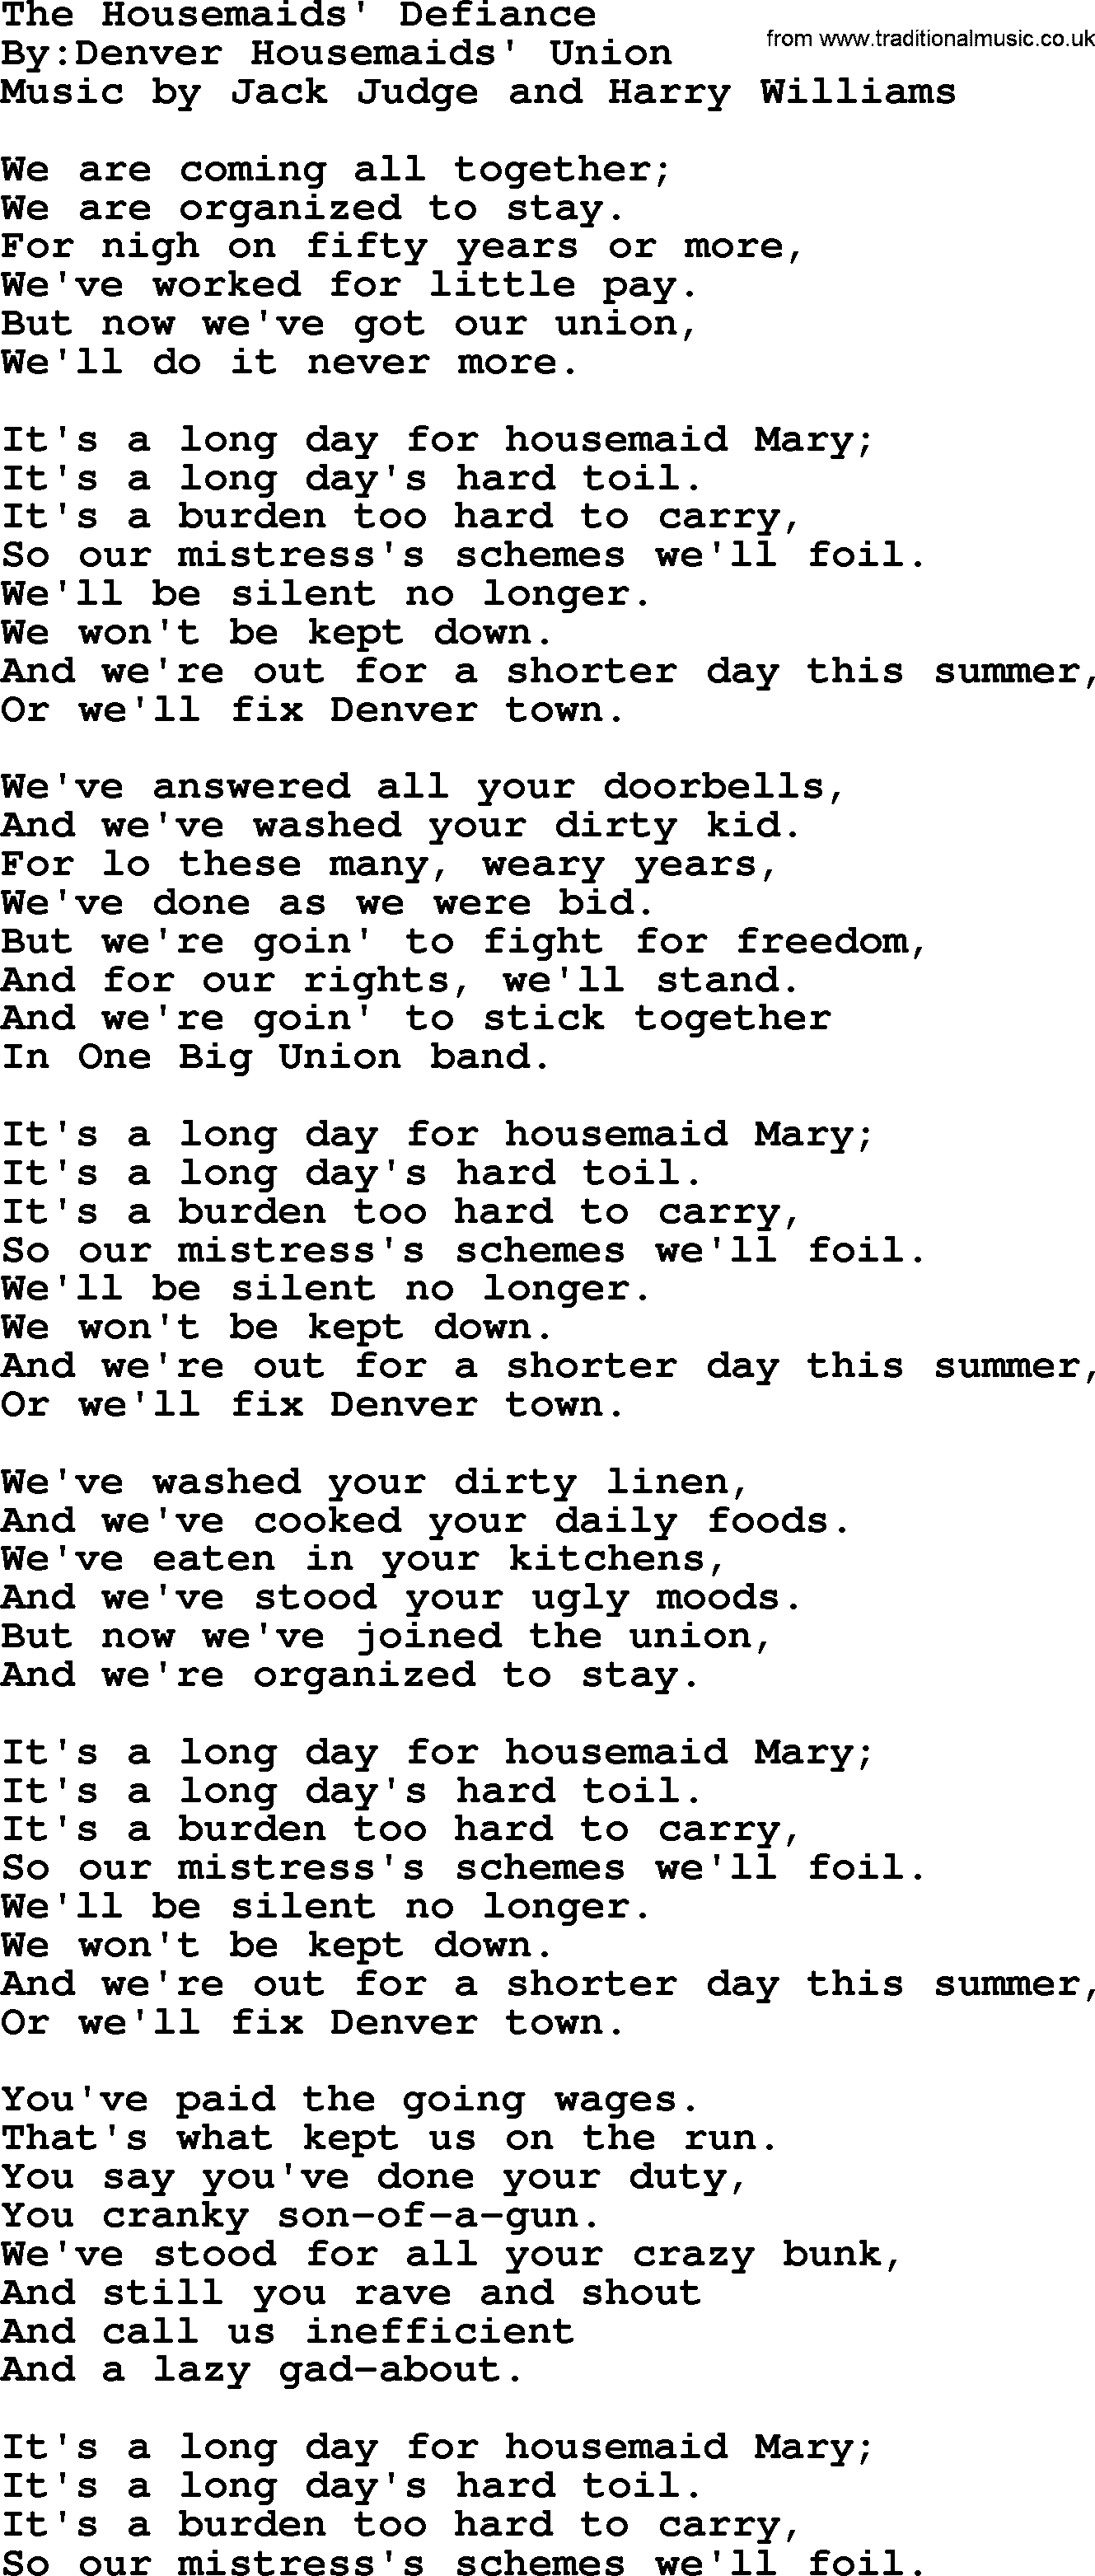 Political, Solidarity, Workers or Union song: The Housemaids Defiance, lyrics